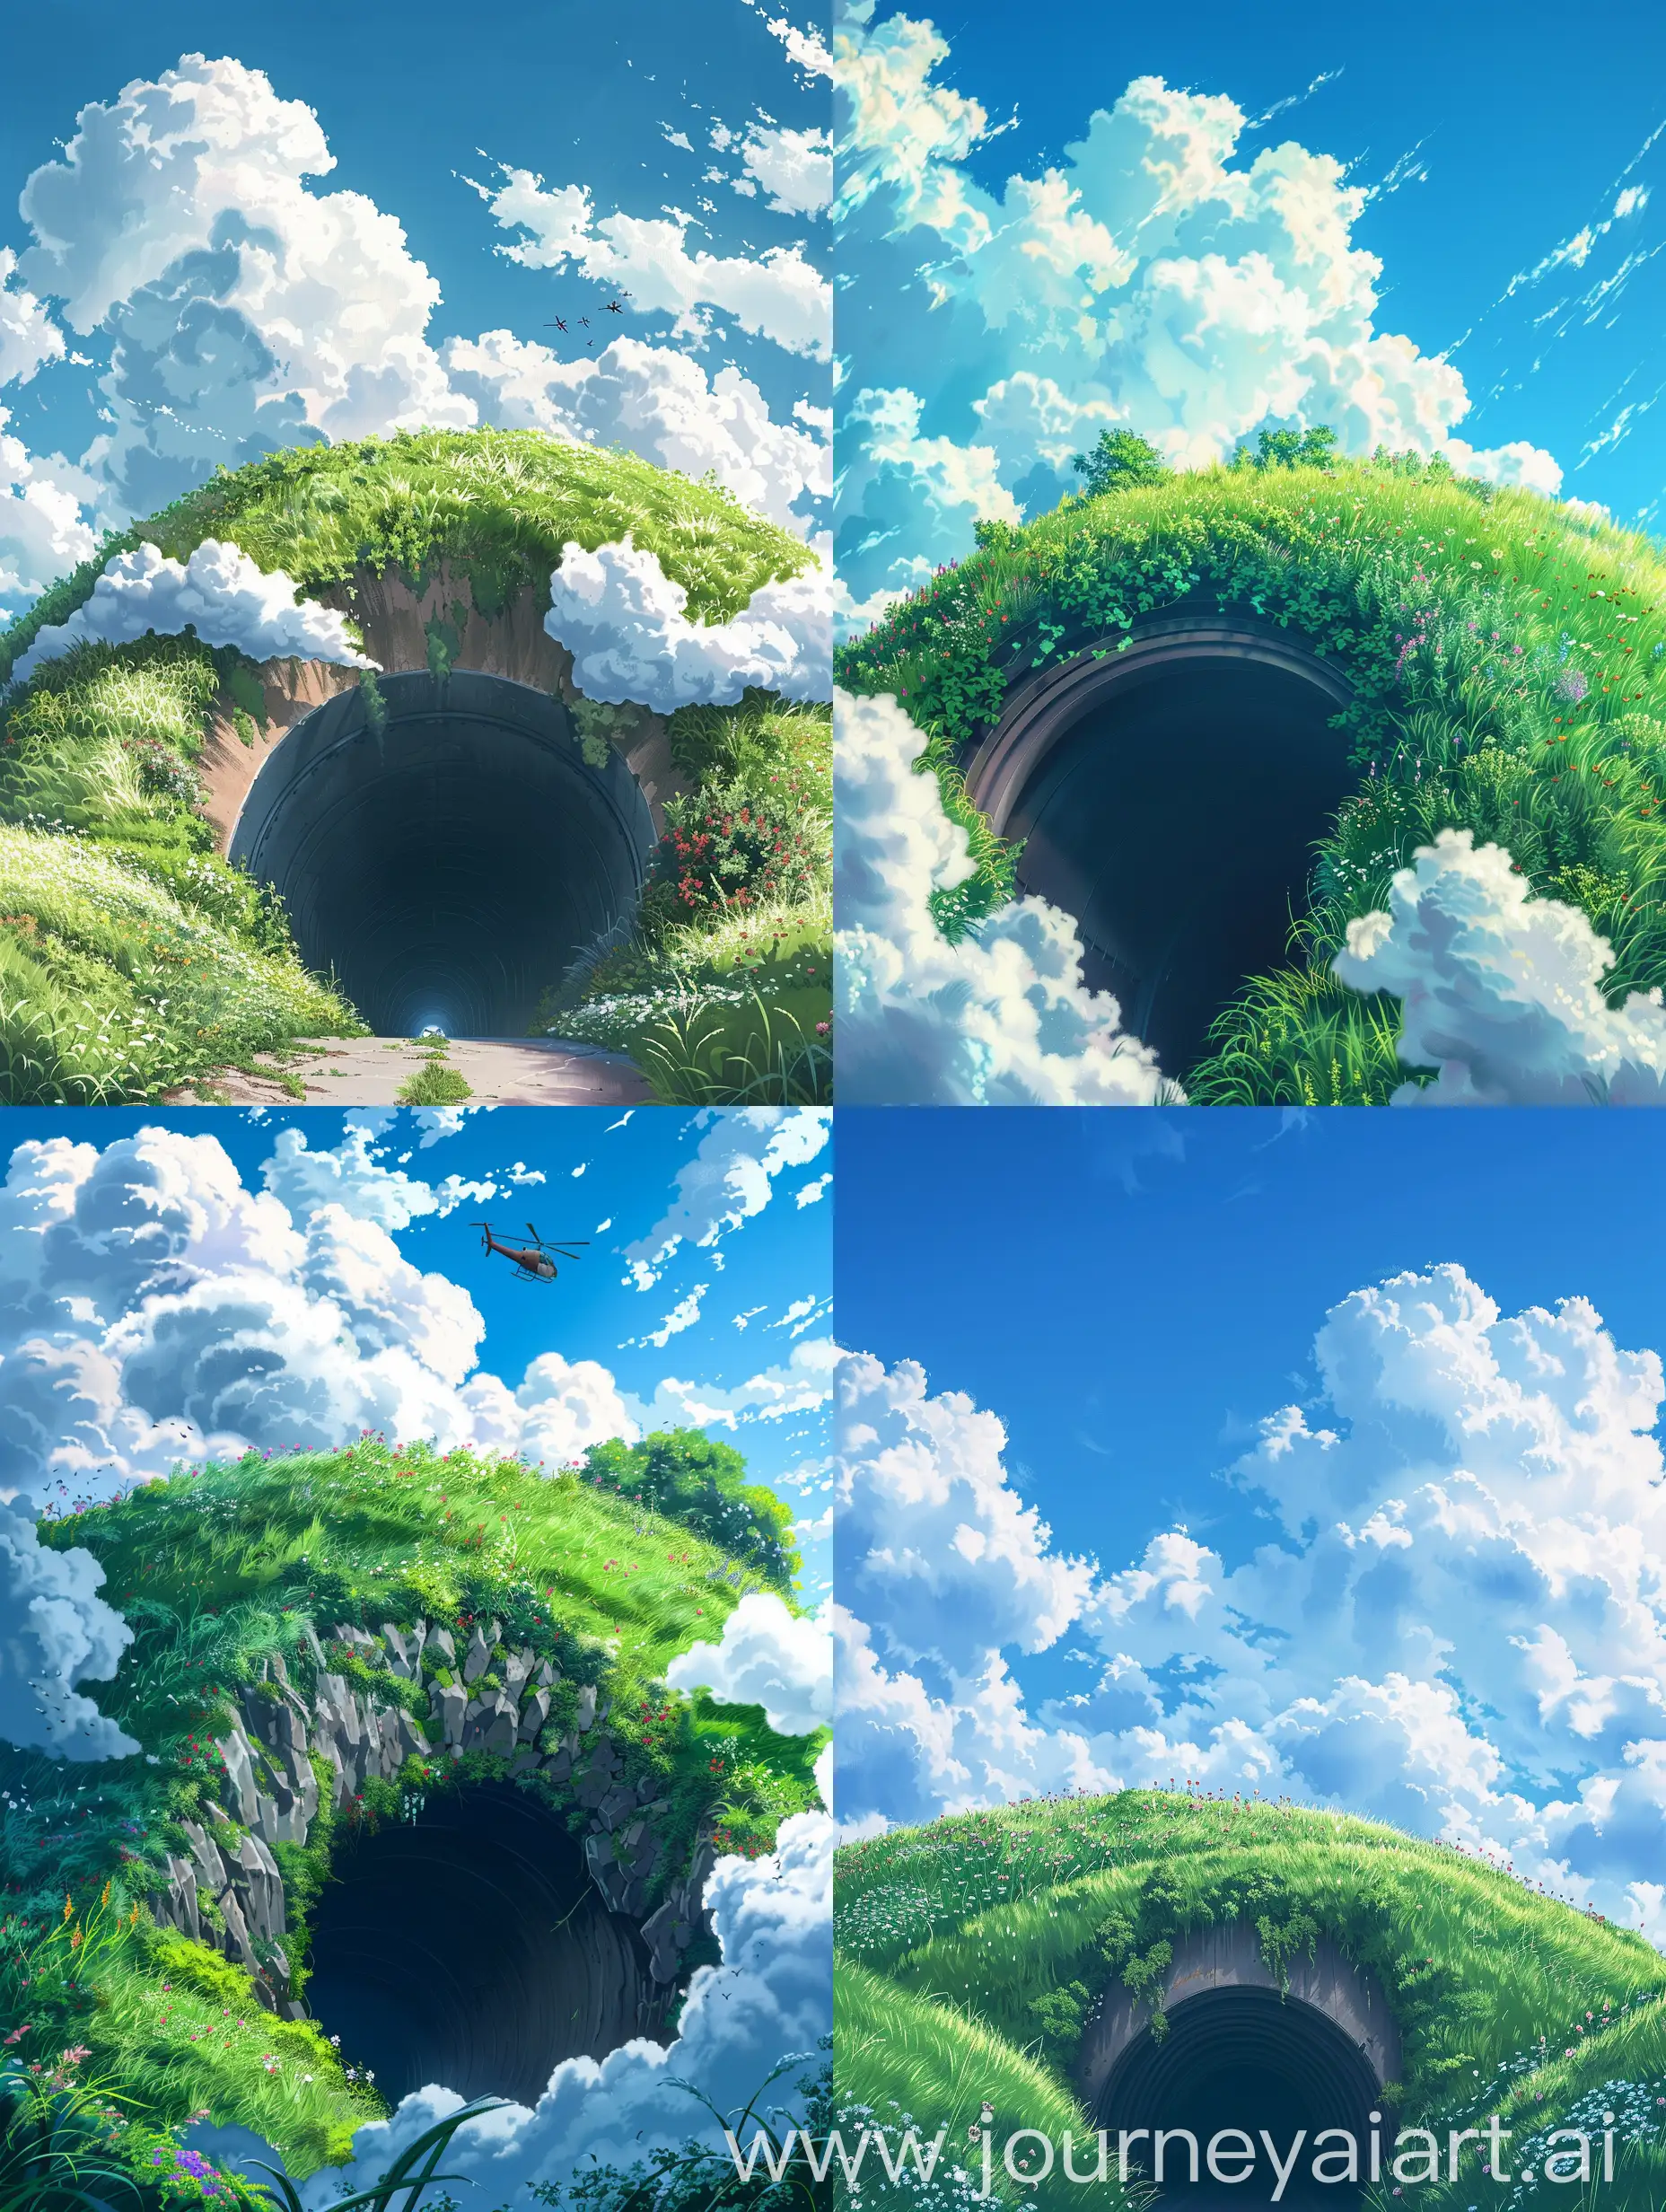 Ghibli-Anime-Style-Tunnel-Entrance-with-Vibrant-Highway-and-Fluffy-Clouds